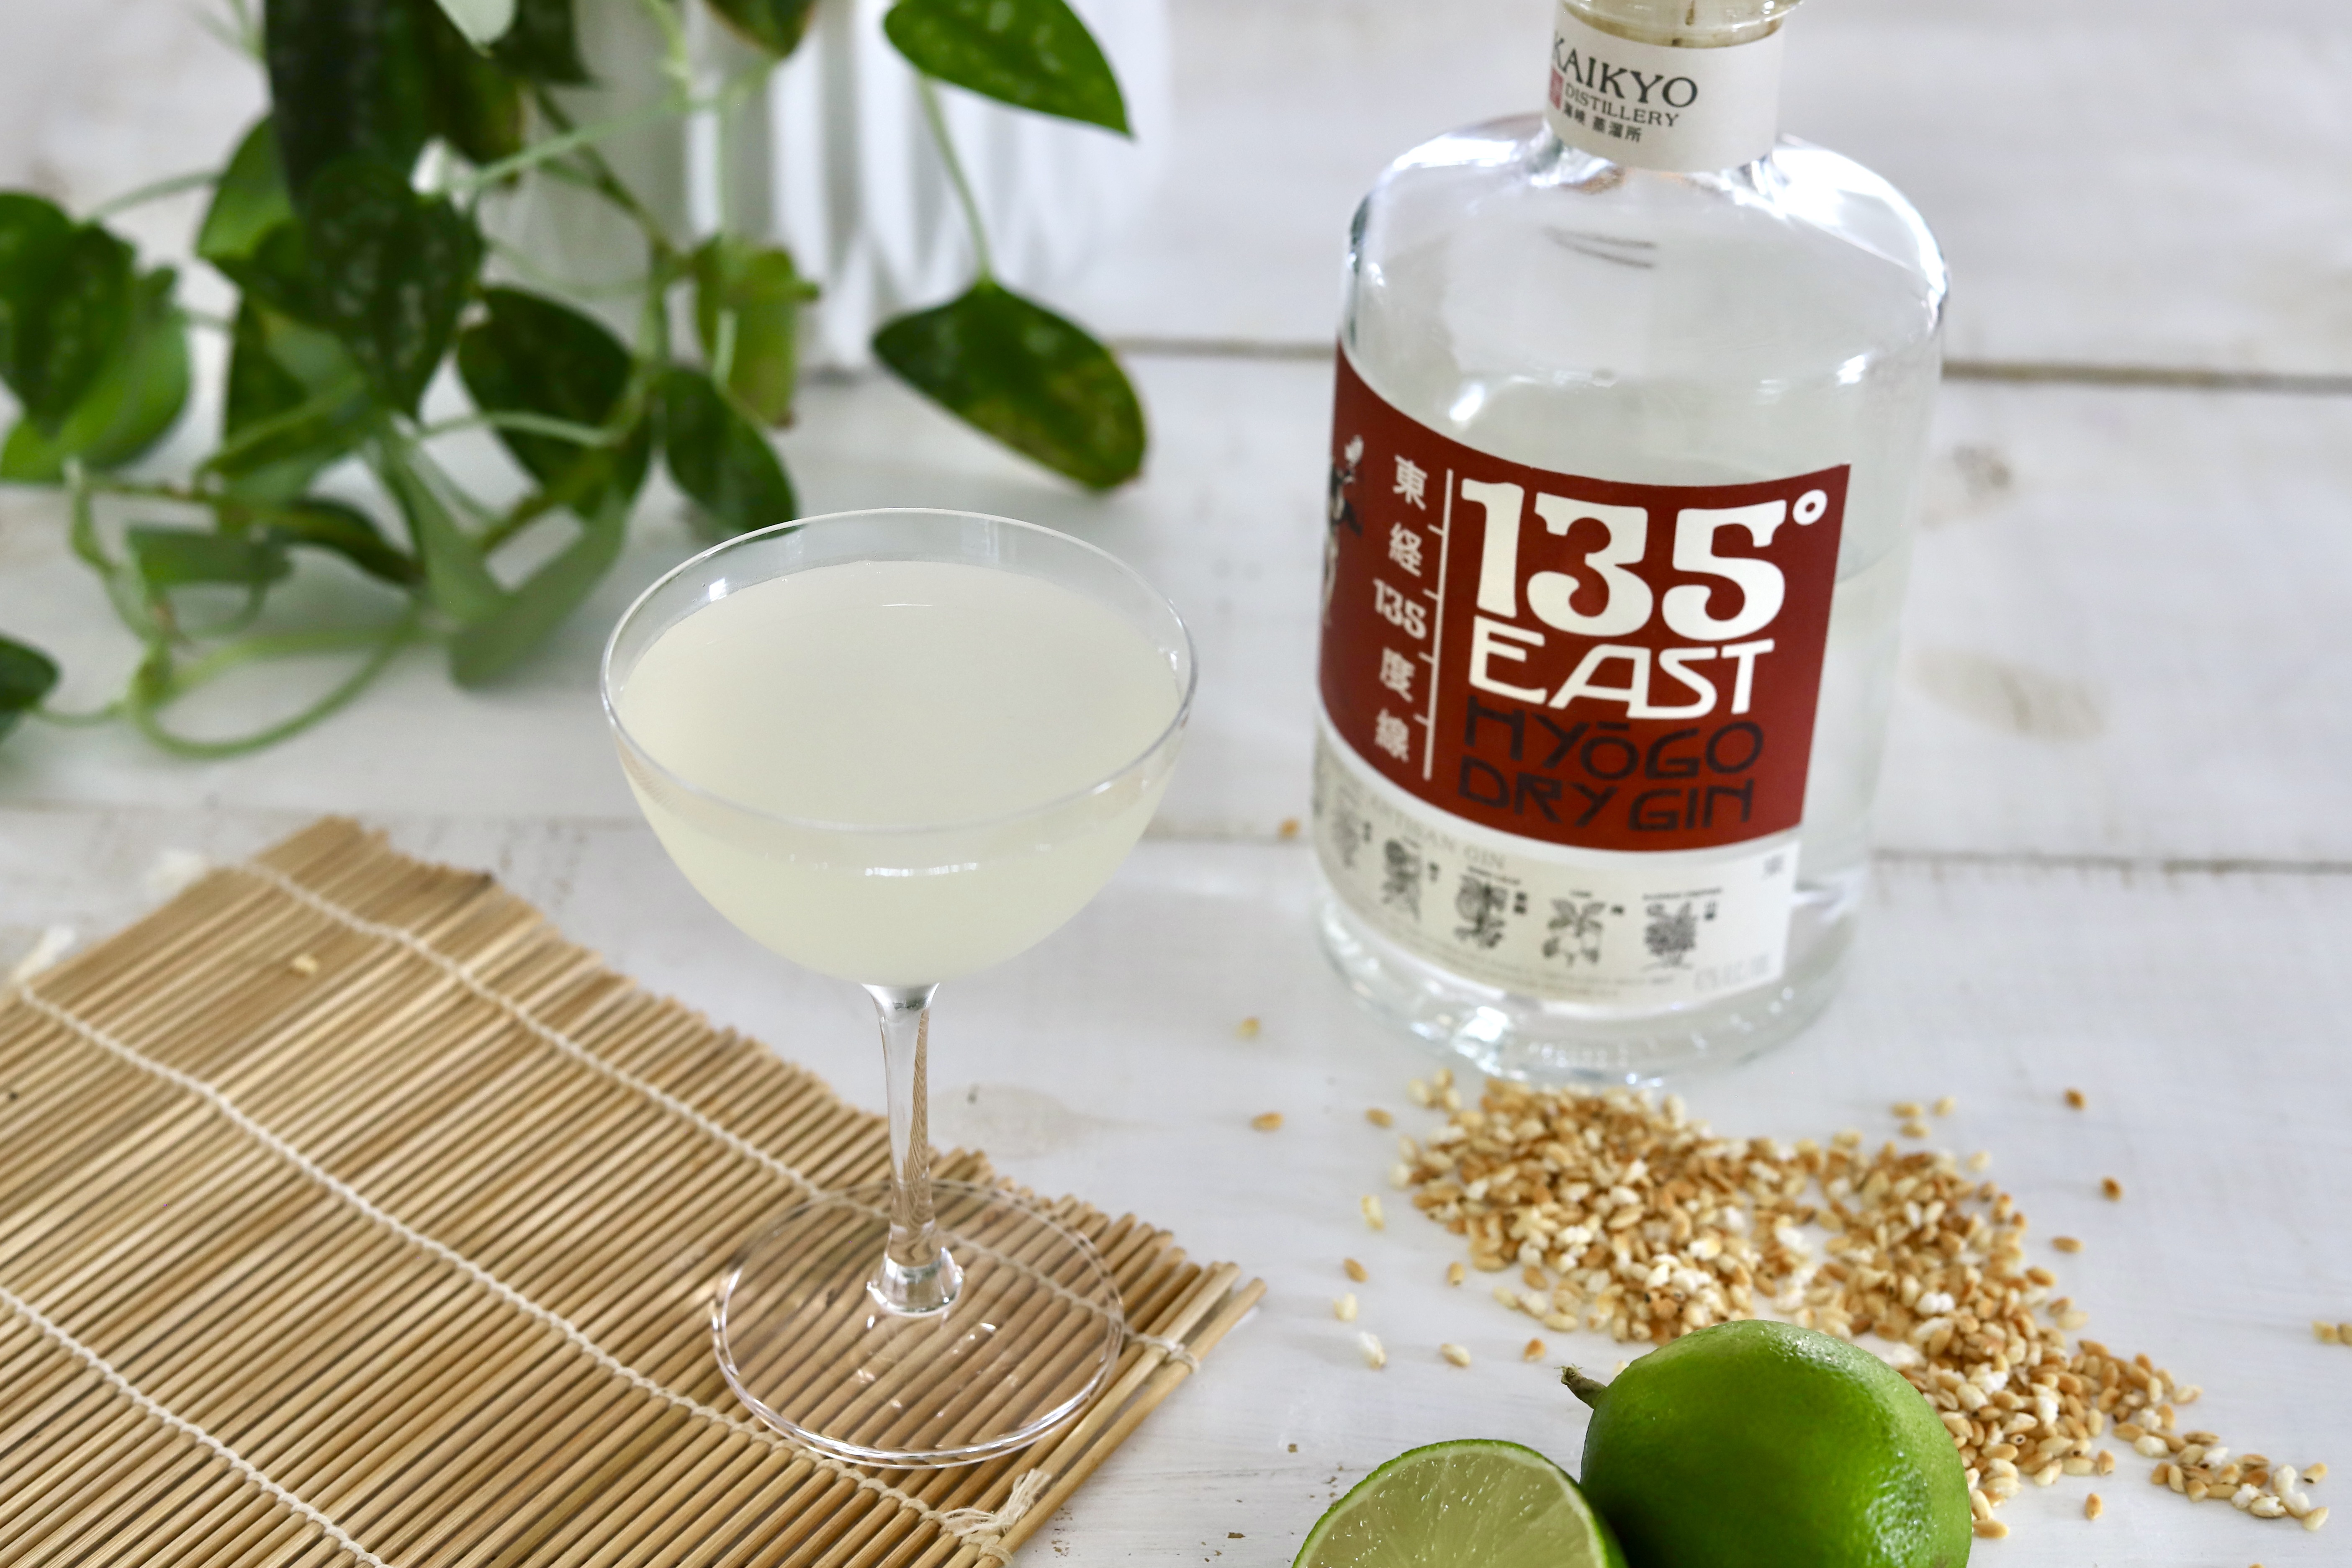 Toasted Rice Gimlet with 135 East